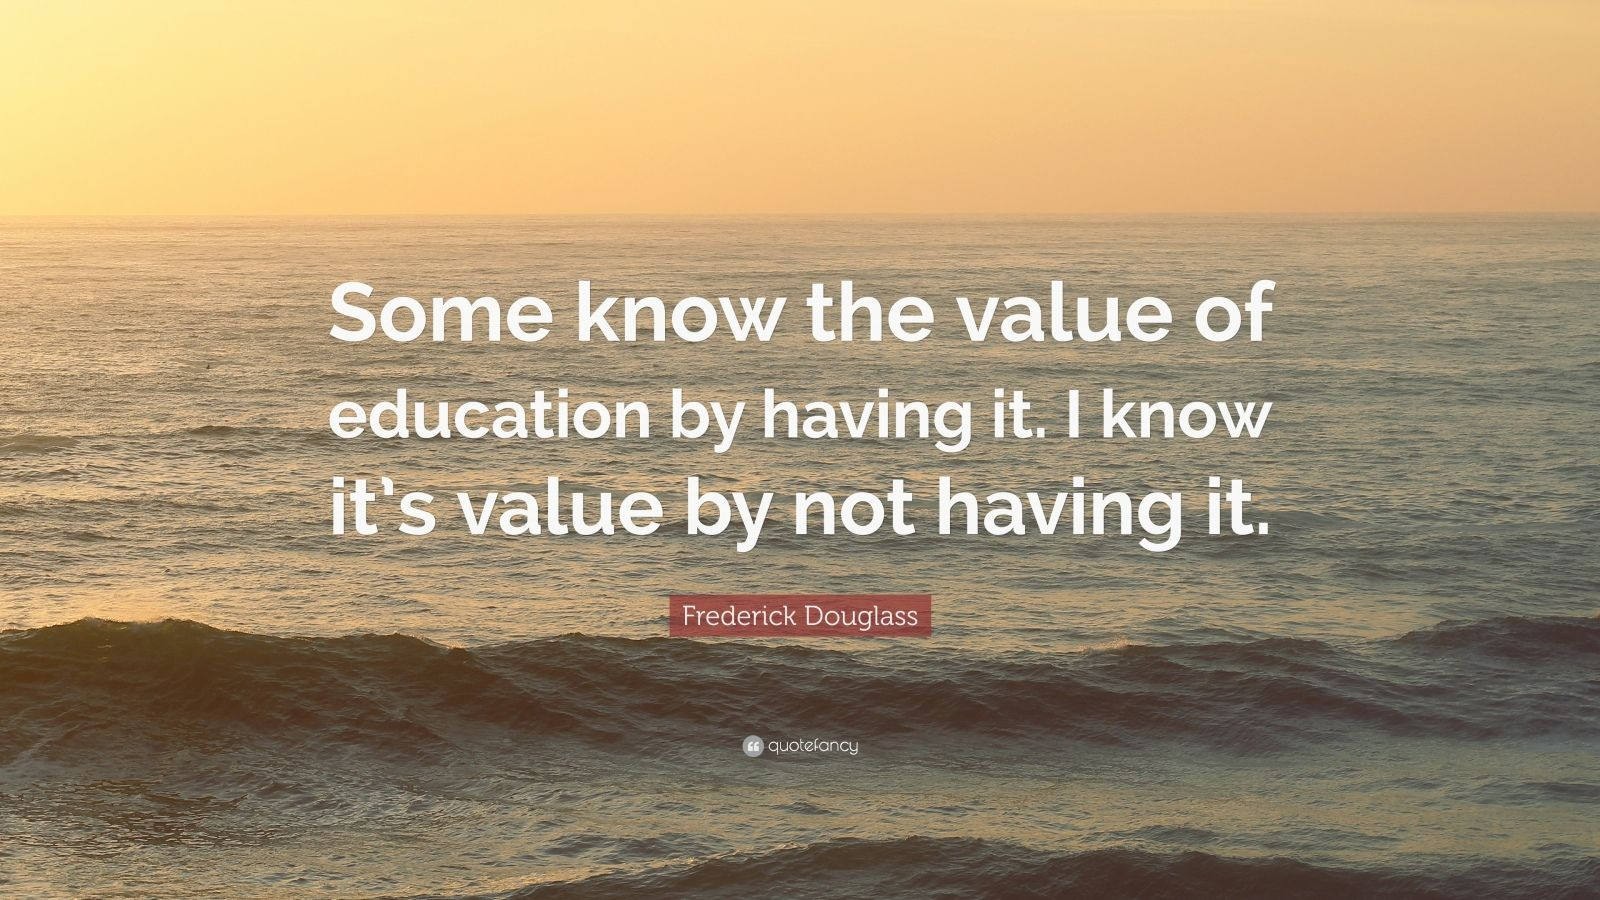 Frederick Douglass Education Quotes
 Frederick Douglass Quote “Some know the value of